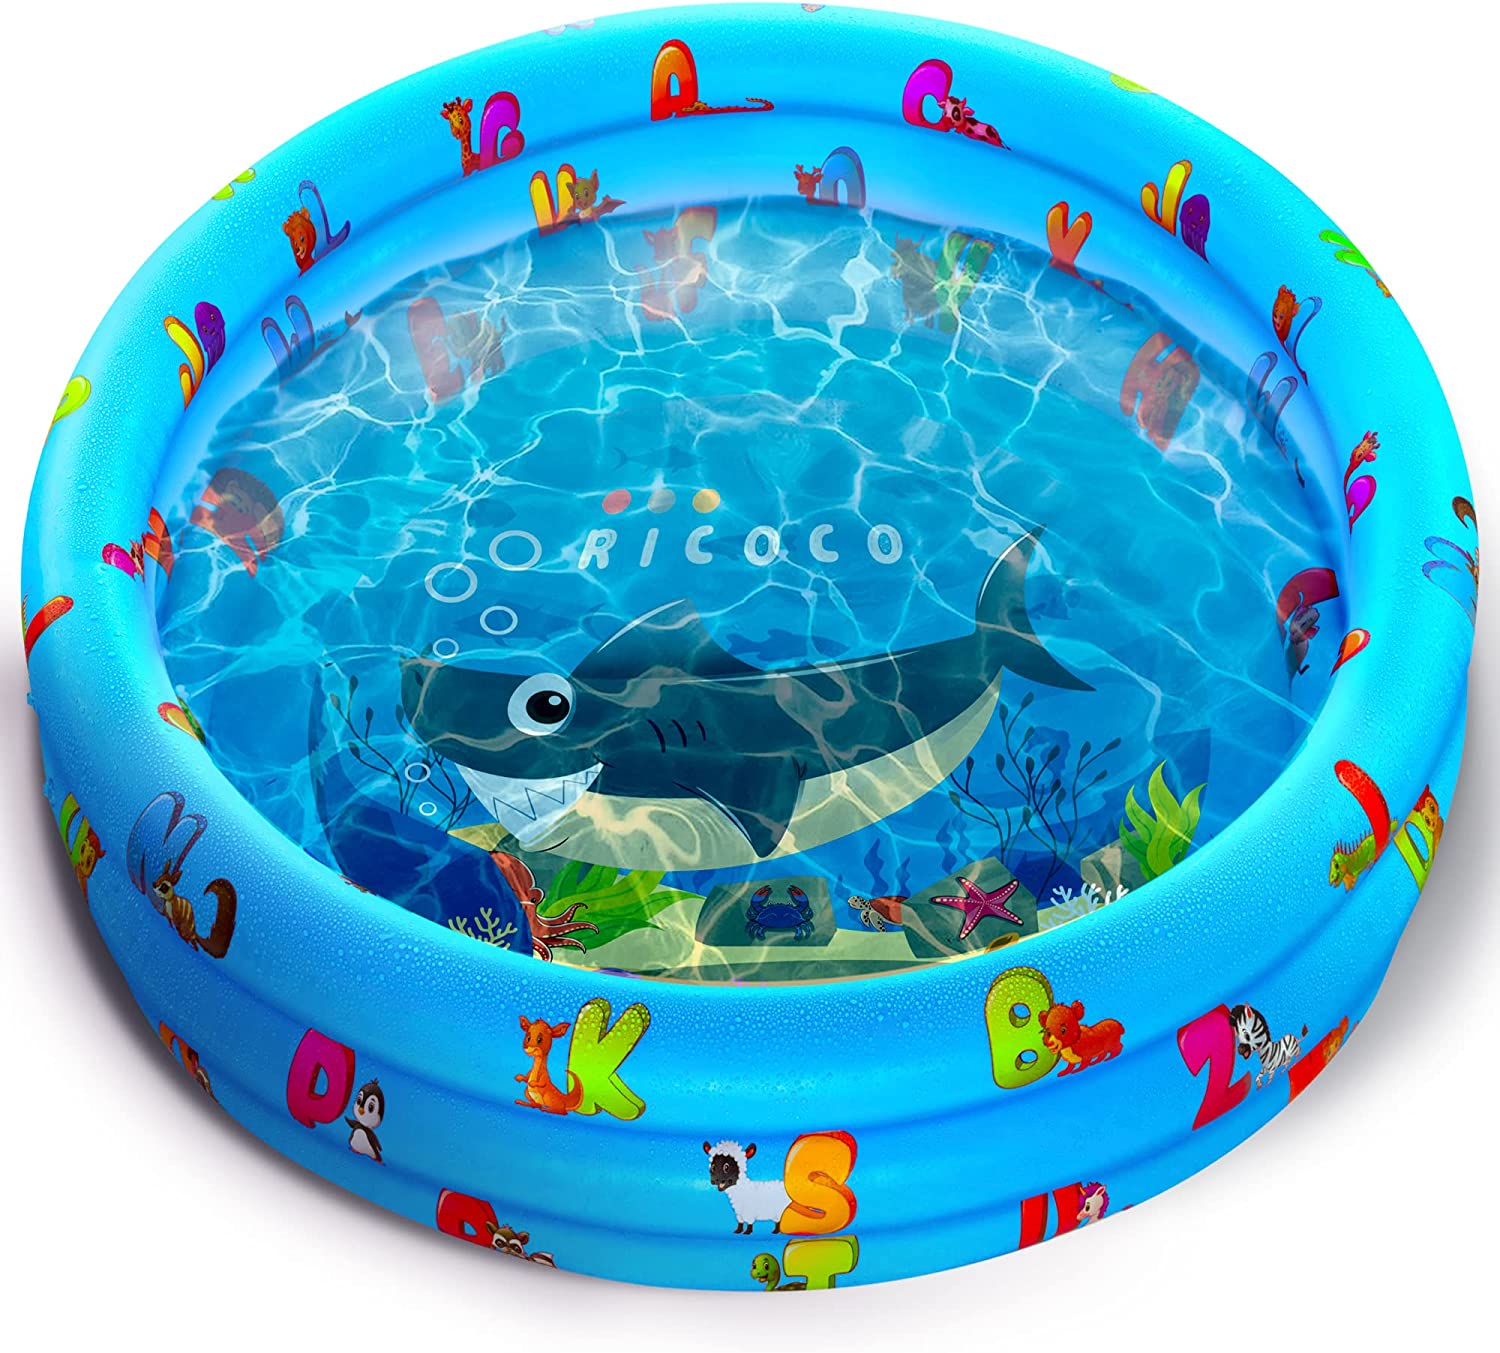 Ricoco Lightweight PVC Inflatable Baby Pool